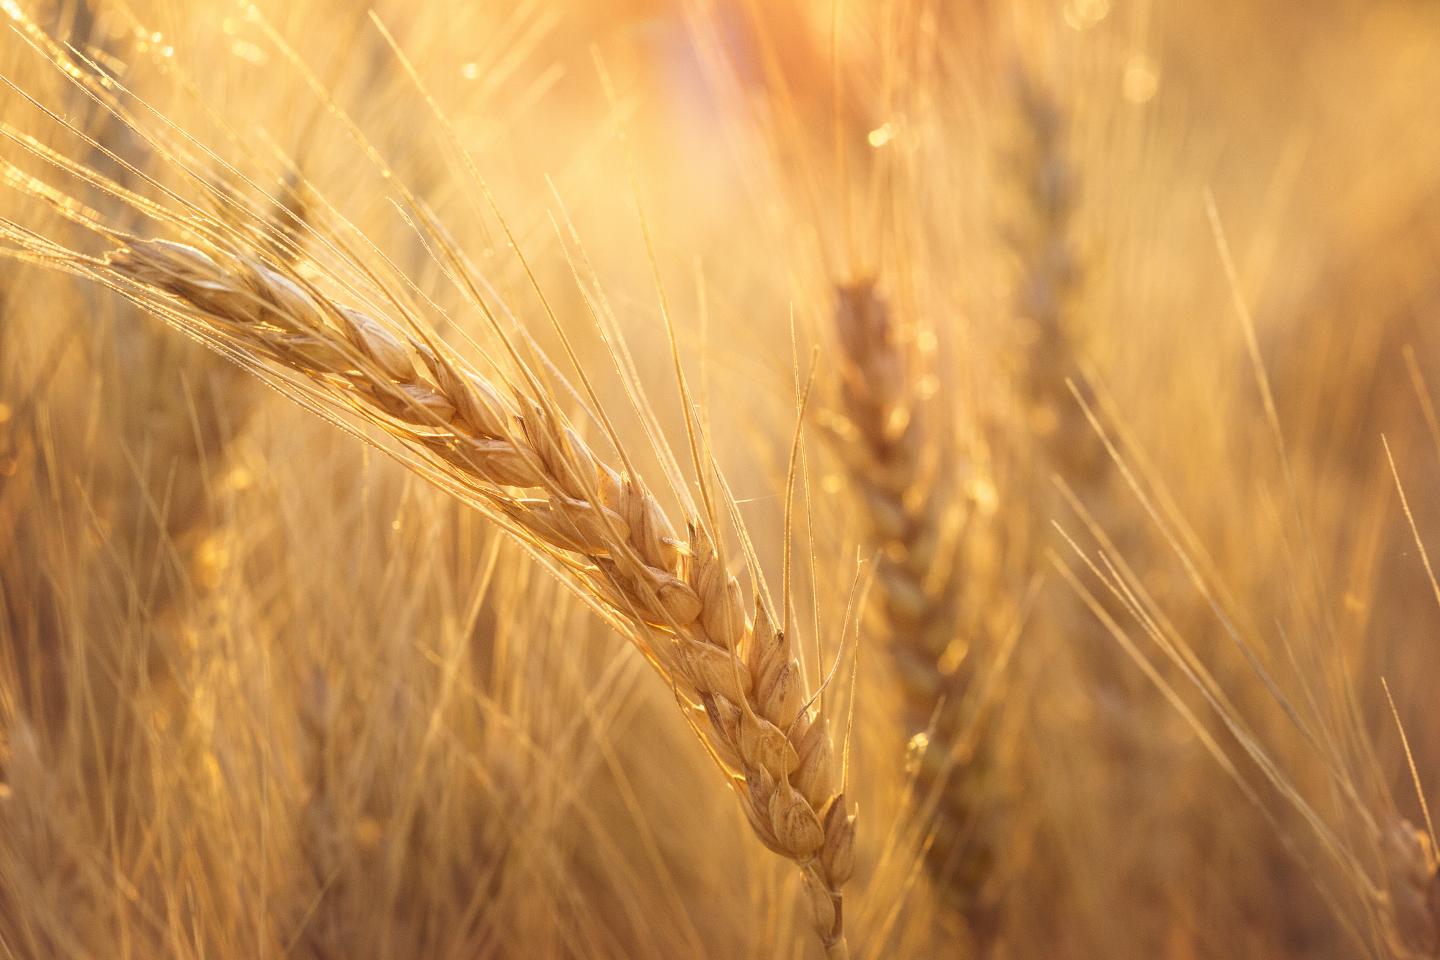 Wheat Code Finally Cracked; Wheat Genome Sequence Will Bring Stronger Varieties to Farmers -- 1